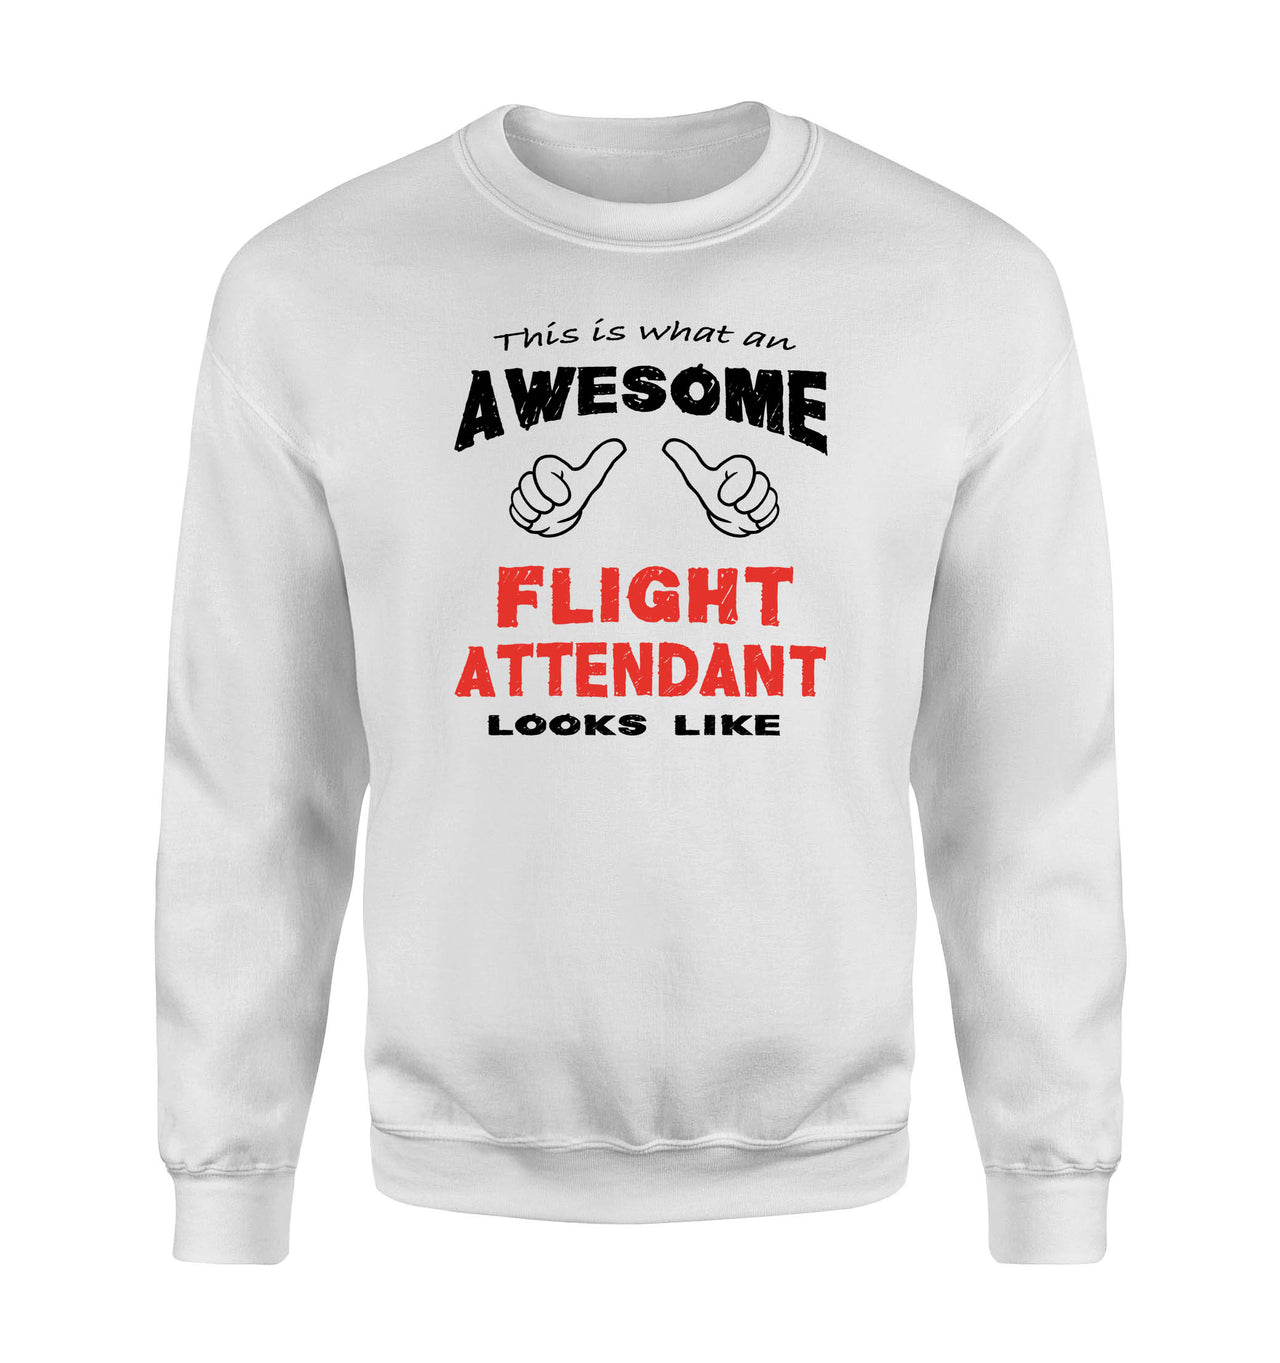 This is What an Awesome Flight Attendant Looks Like Sweatshirts